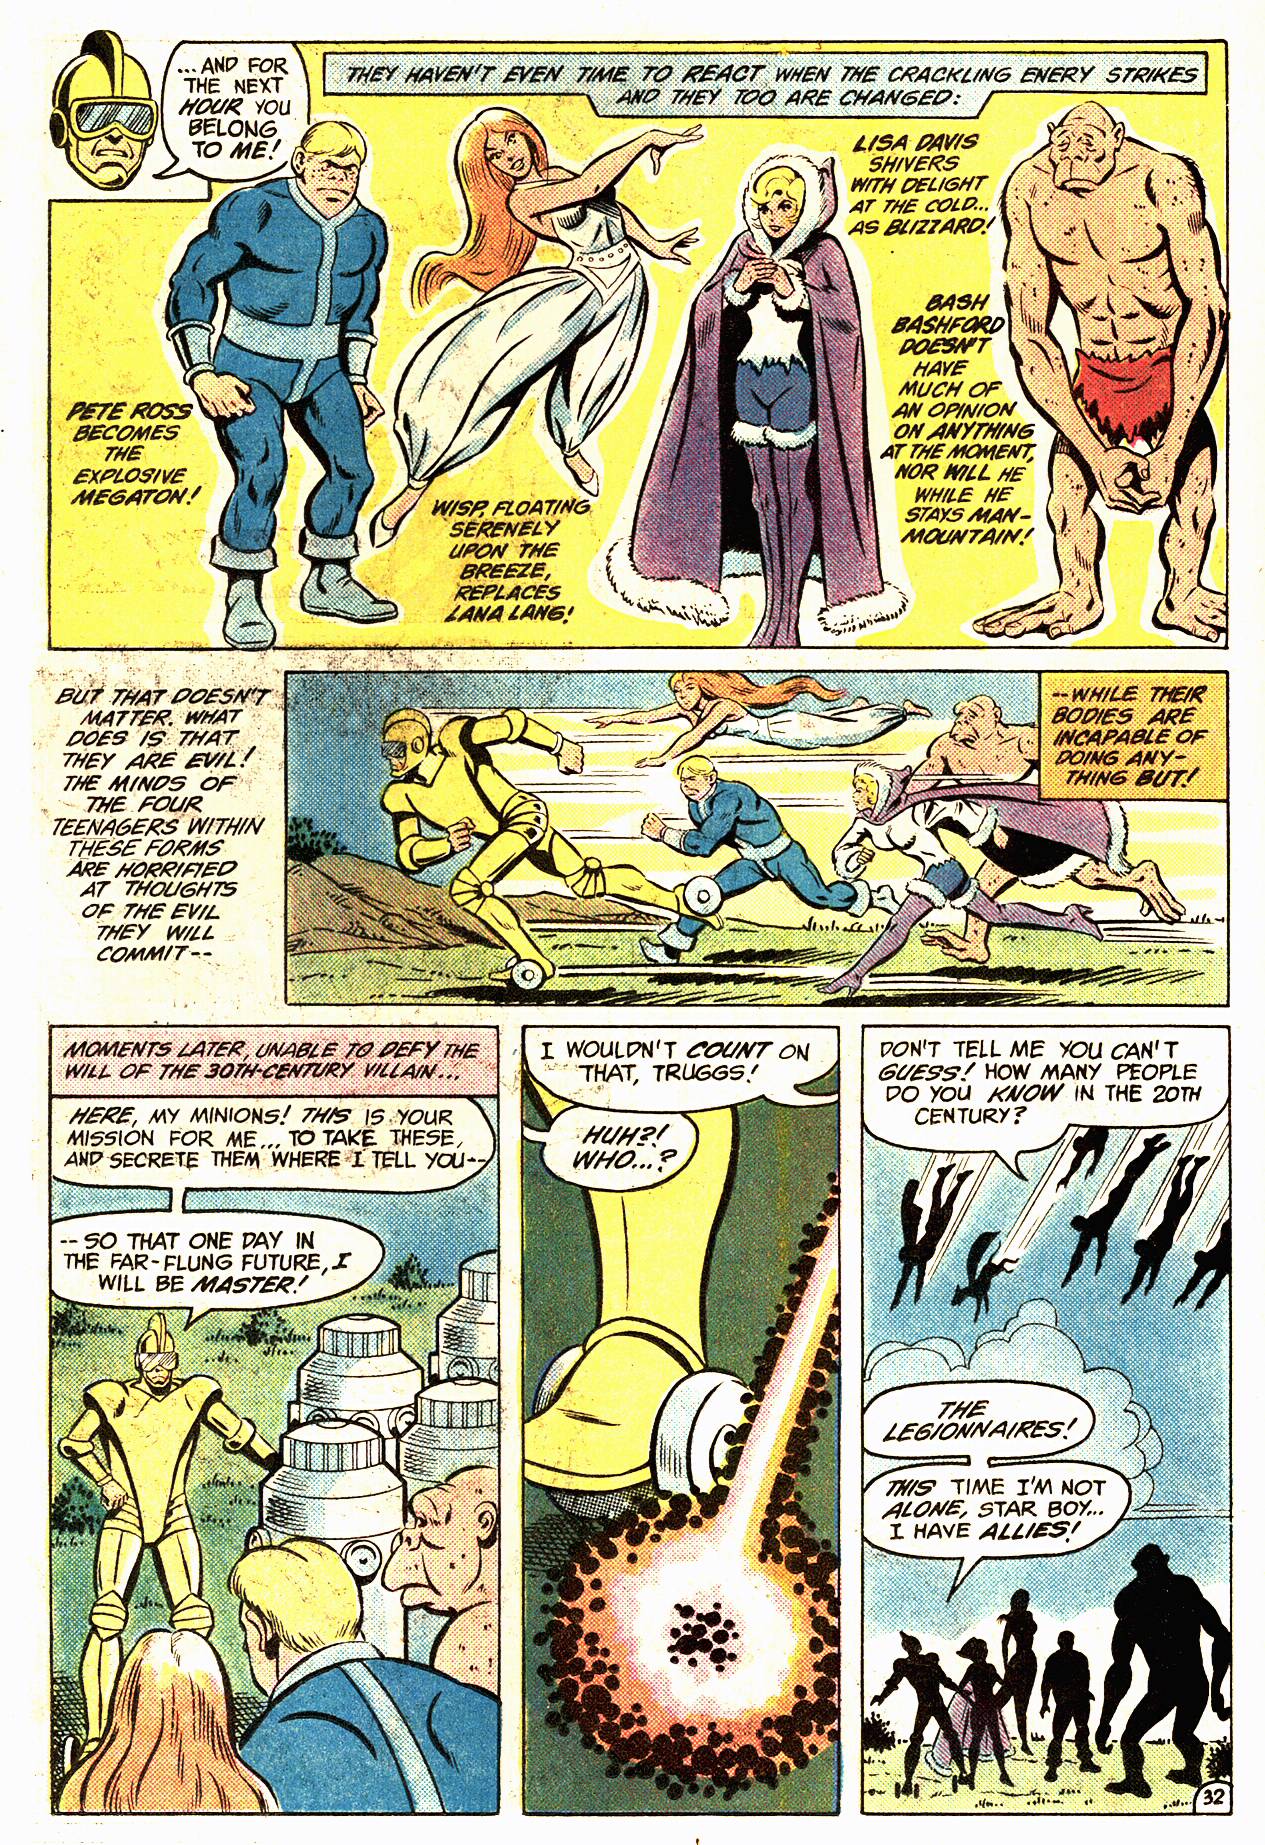 The New Adventures of Superboy 50 Page 32